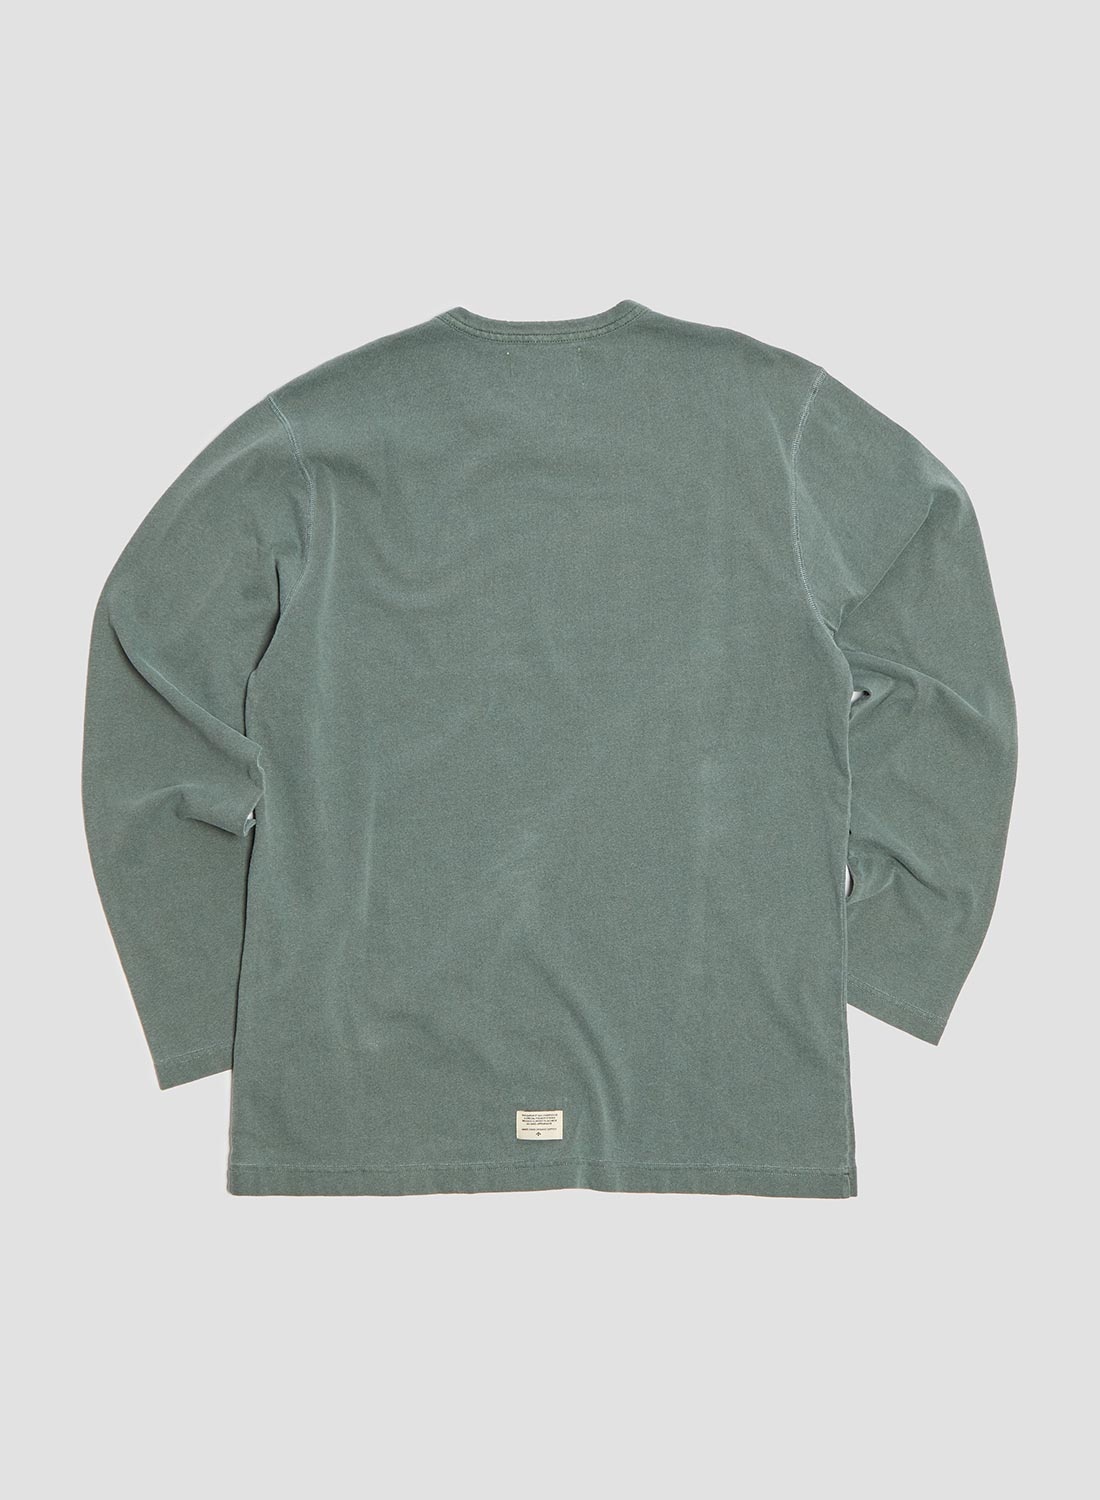 Embroidered Arrow Long Sleeve Tee in Sports Green - 6